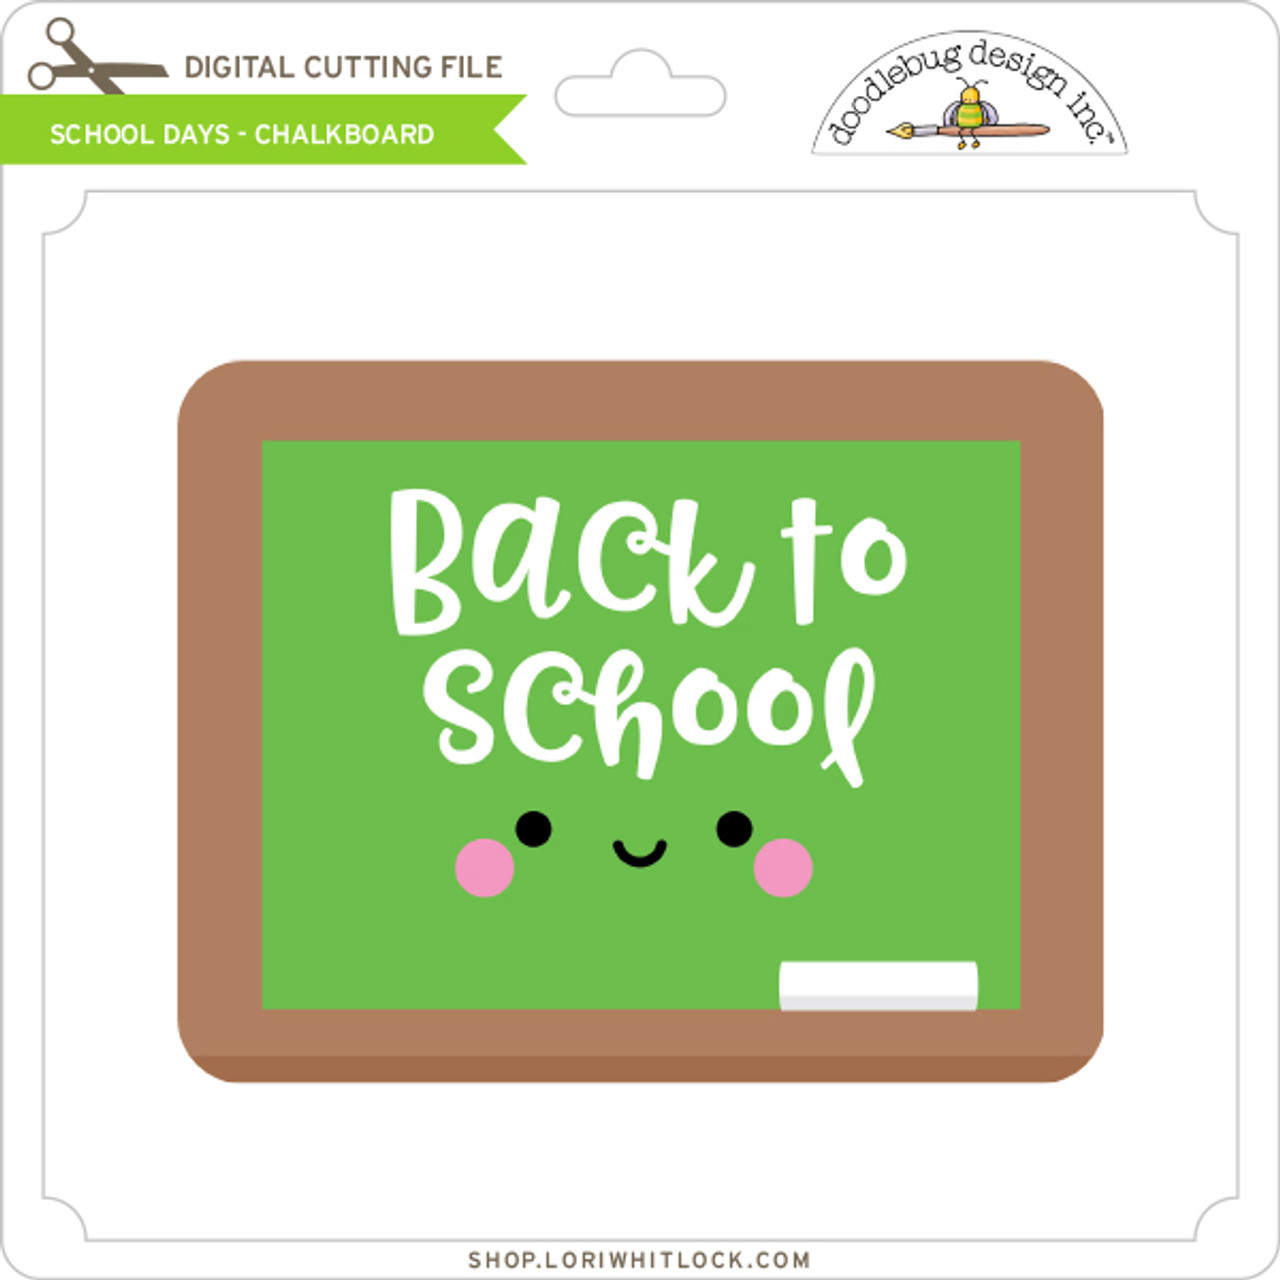 Free First Day Of School Chalkboard Sign SVG File